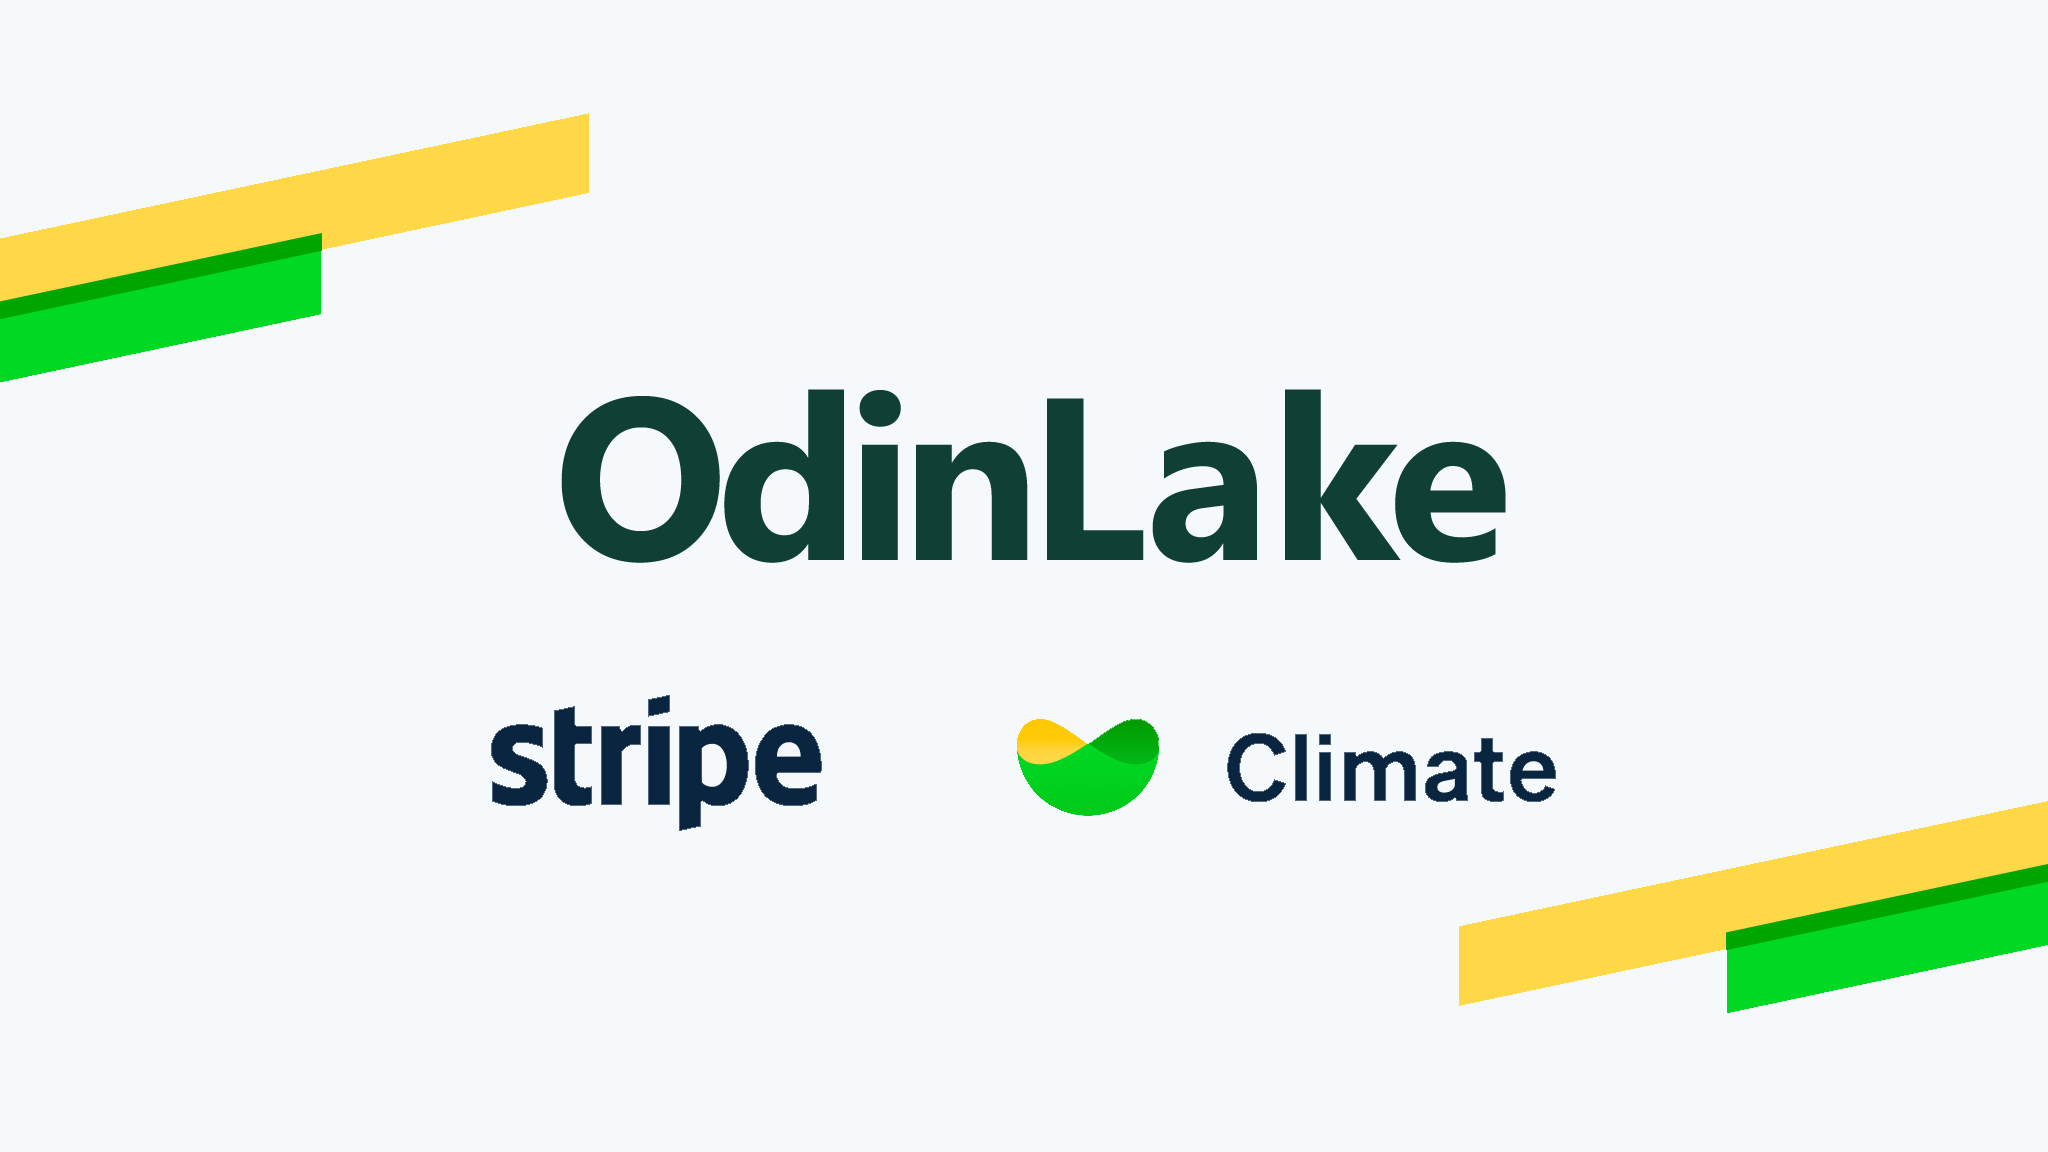 OdinLake-Strengthens-Environmental-Commitment-by-Joining-Stripe-Climate OdinLake